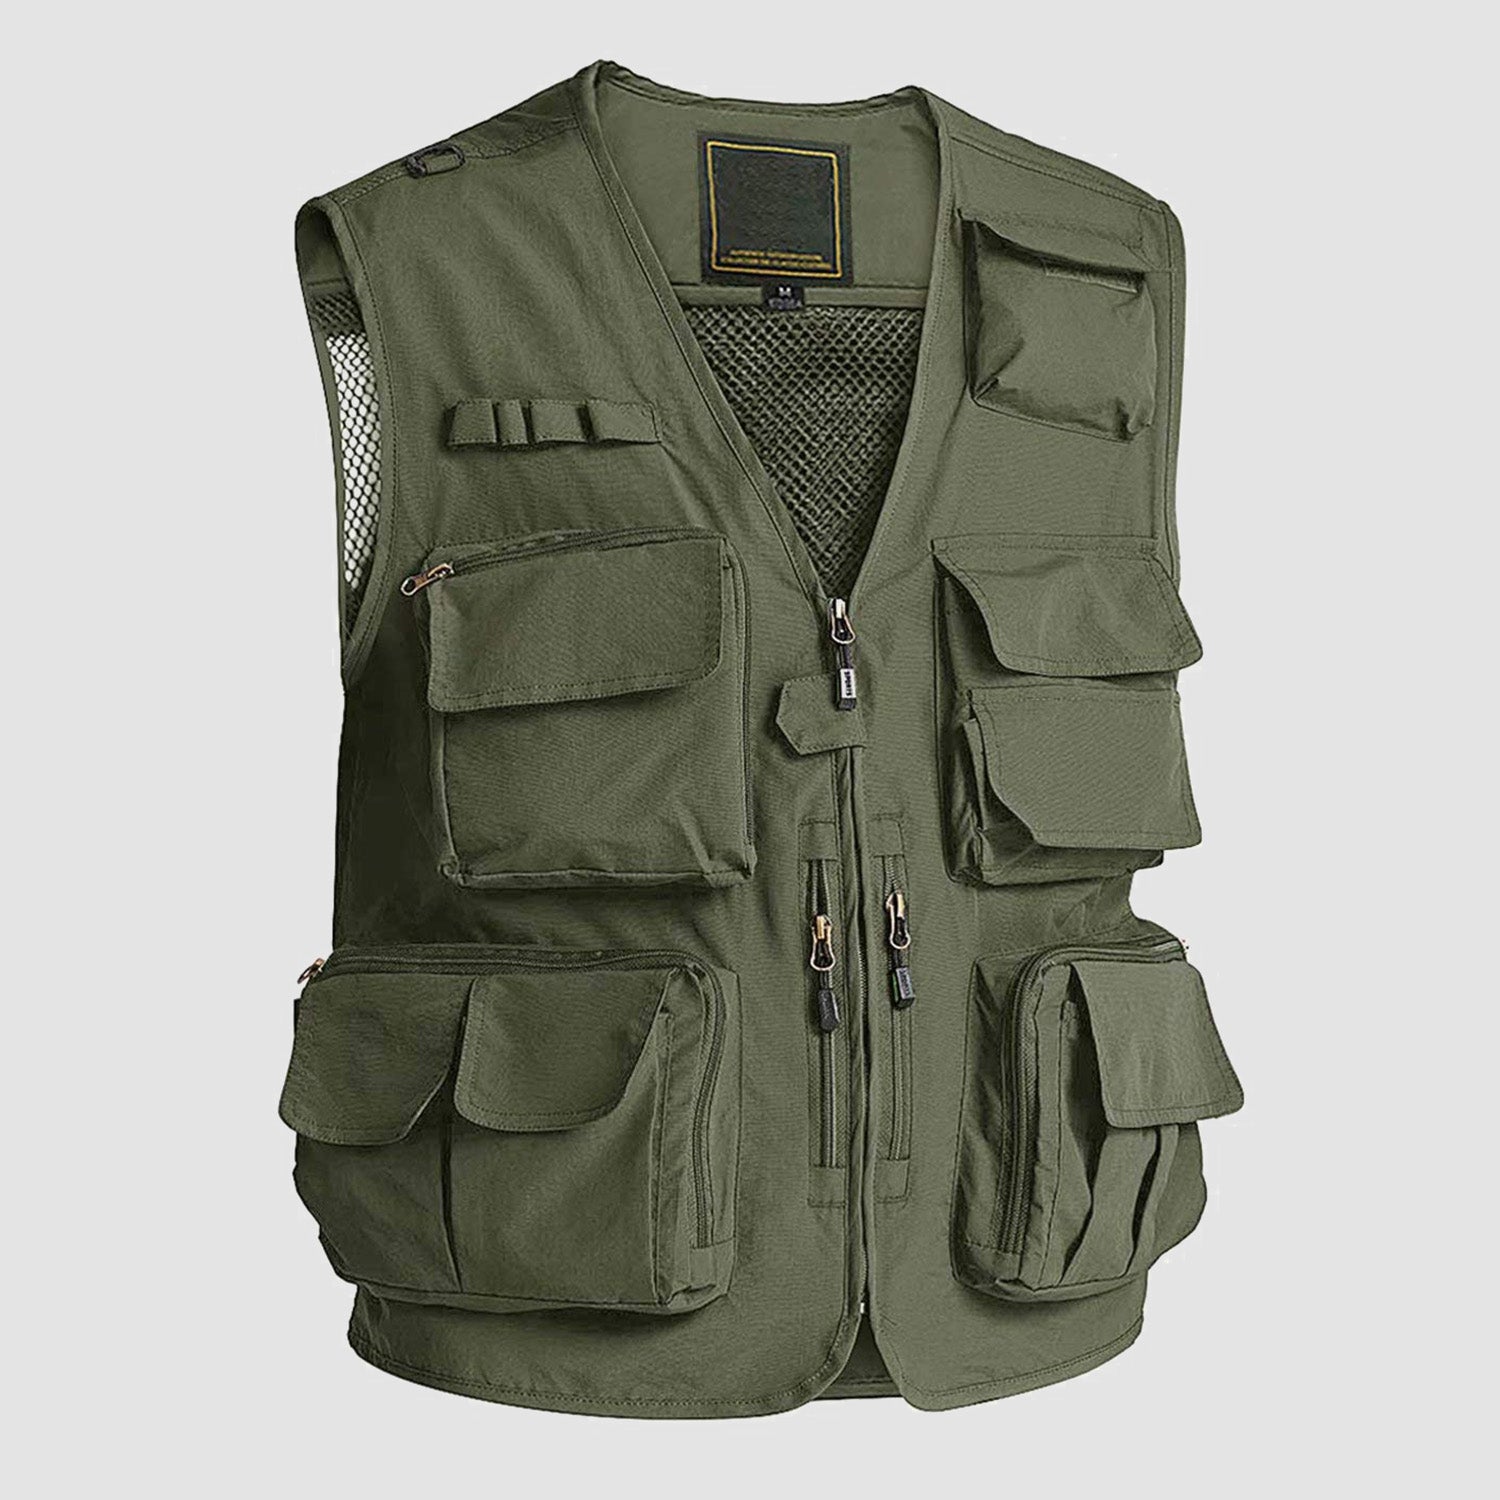 Outdoor Vest Fishing Vest Camo Hunting Trip Camping Jacket Multi